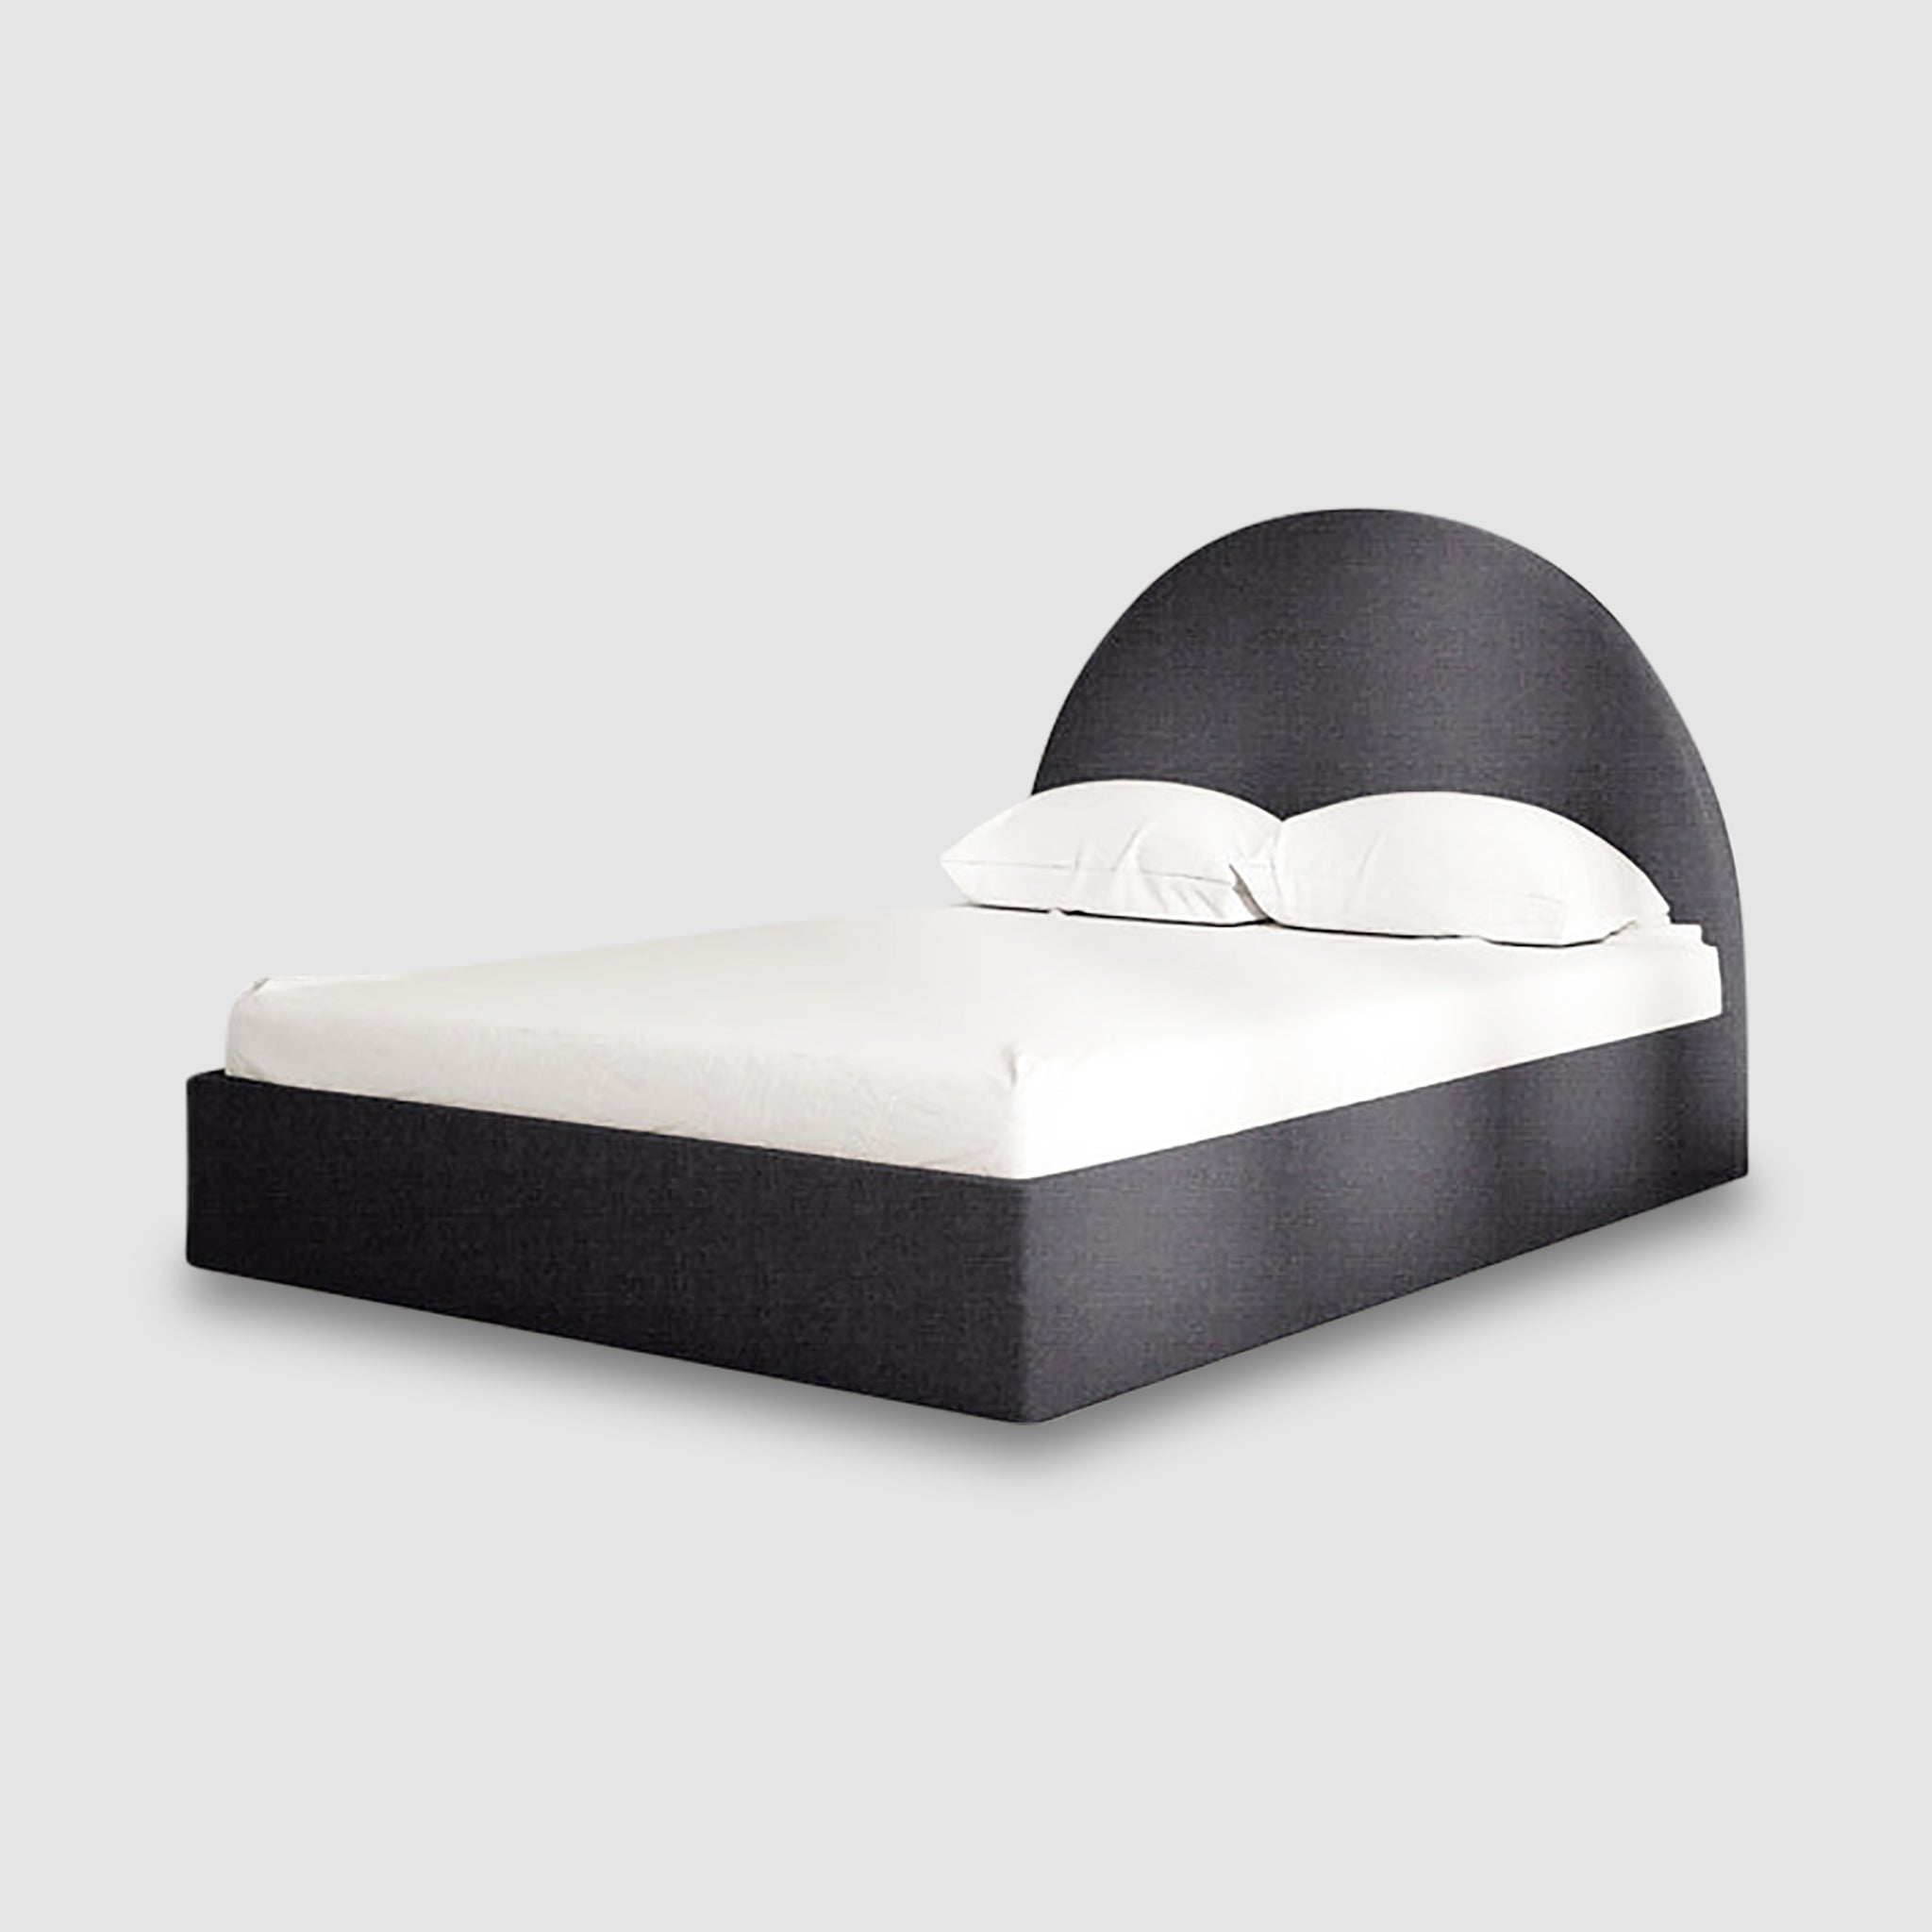 The Archie Bed featuring a sophisticated and compact design with grey upholstery.